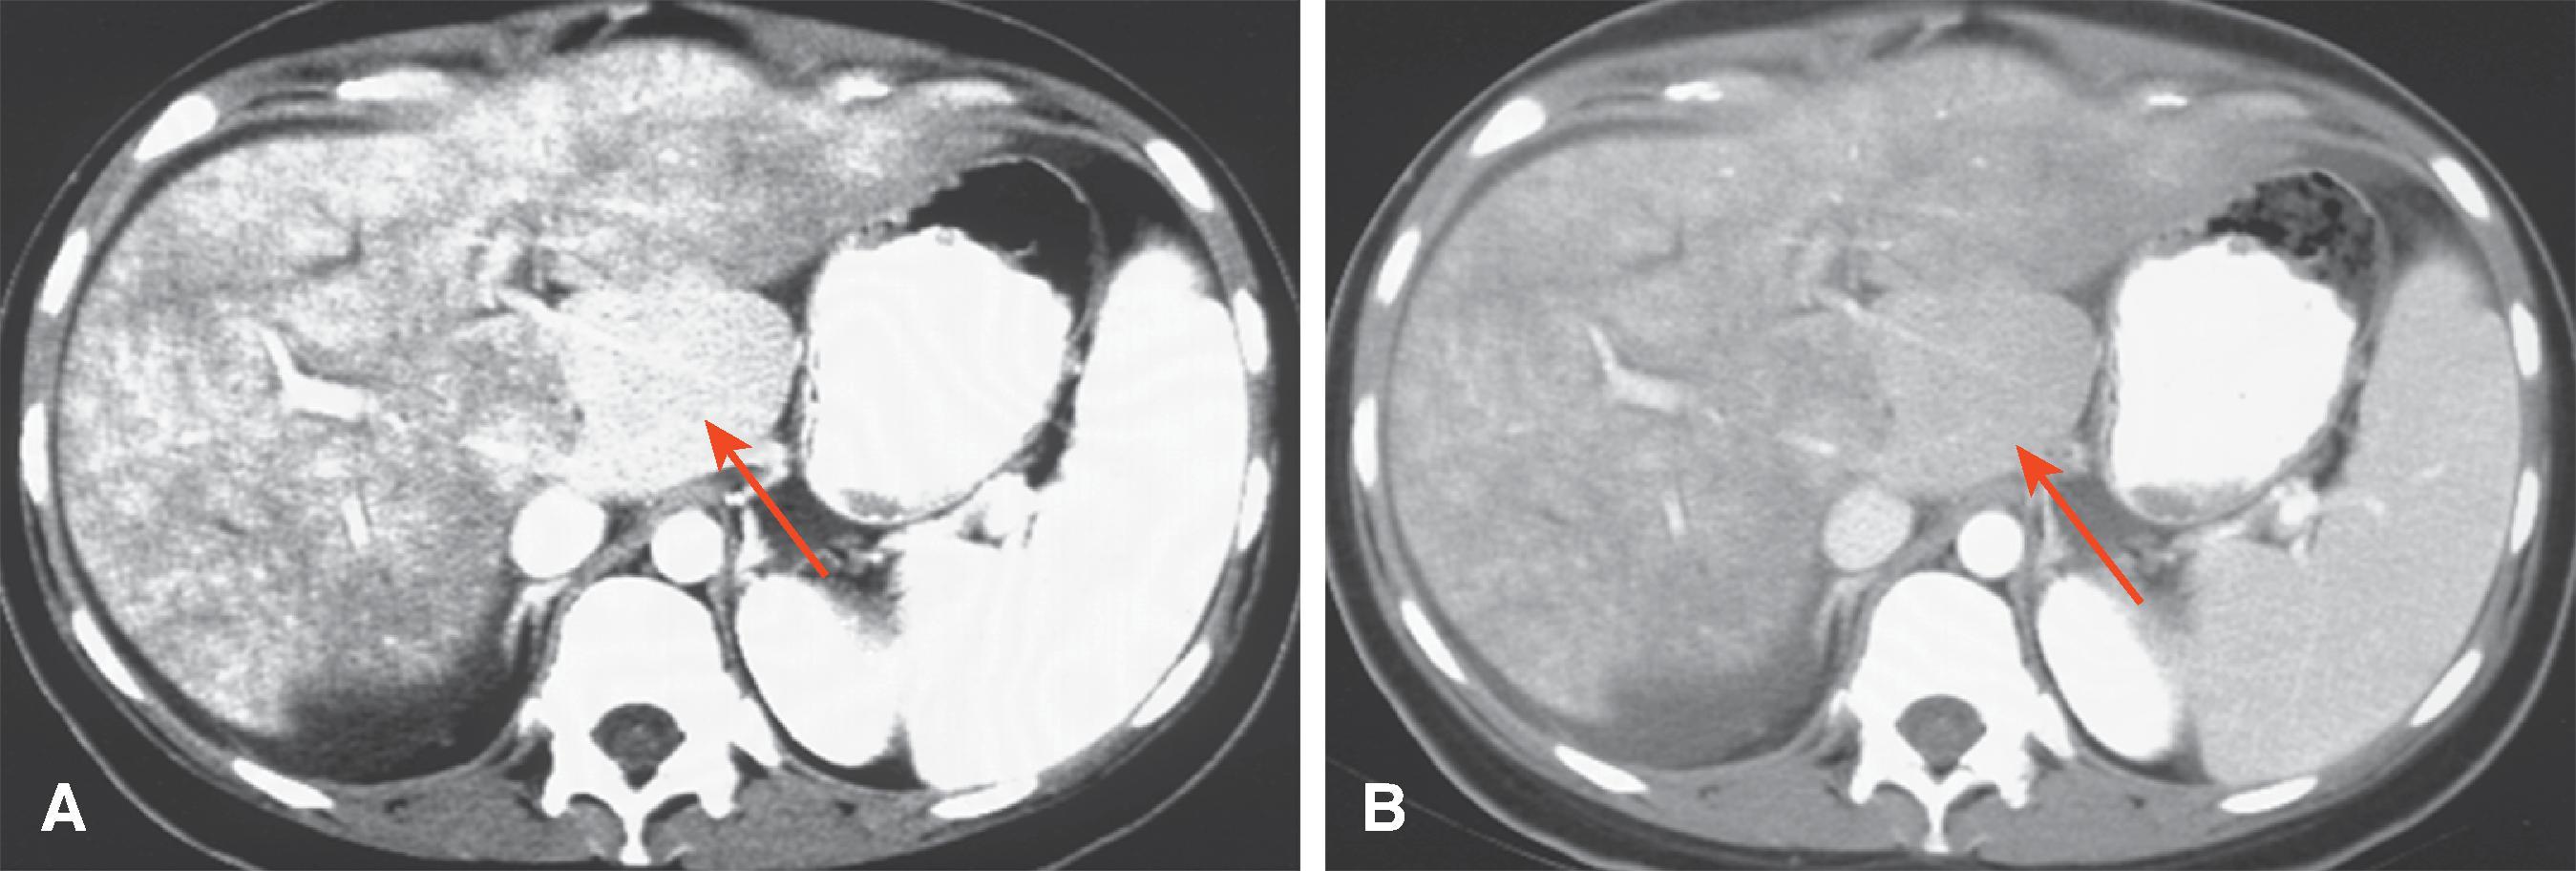 Fig. 57.7, Budd-Chiari syndrome: flip-flop pattern on computer tomography (CT).